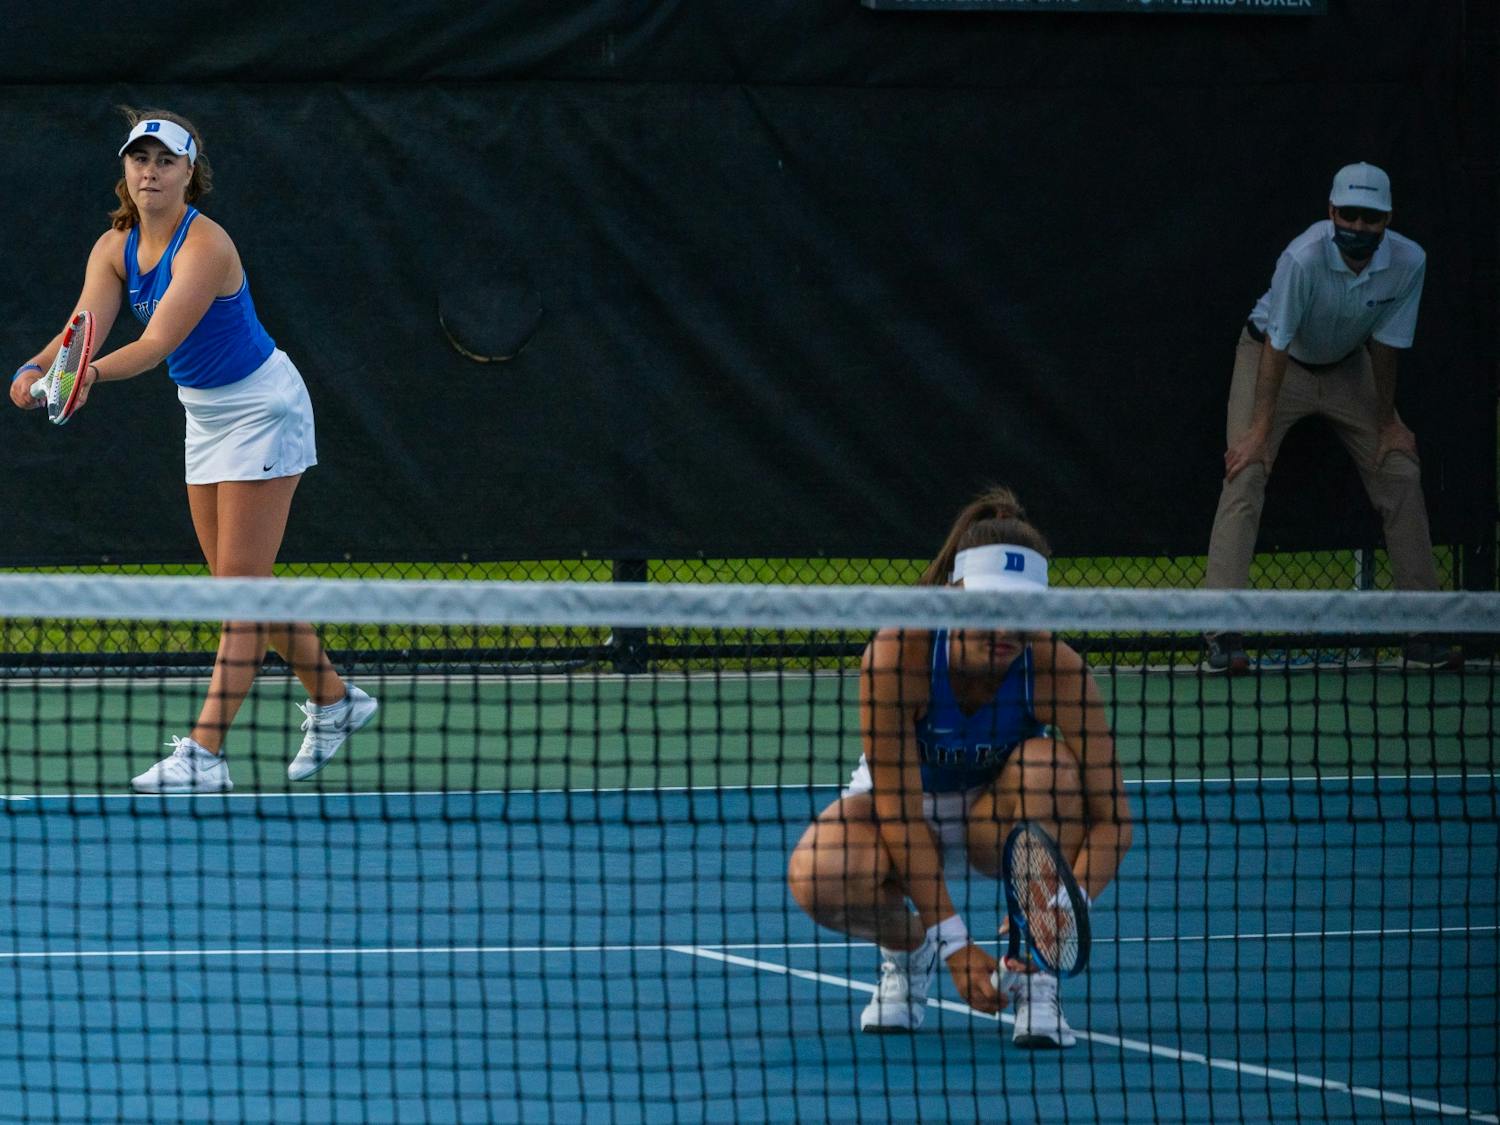 Chloe Beck and Karolina Berankova may have lost their doubles match, but Beck came back in singles to win the deciding point.